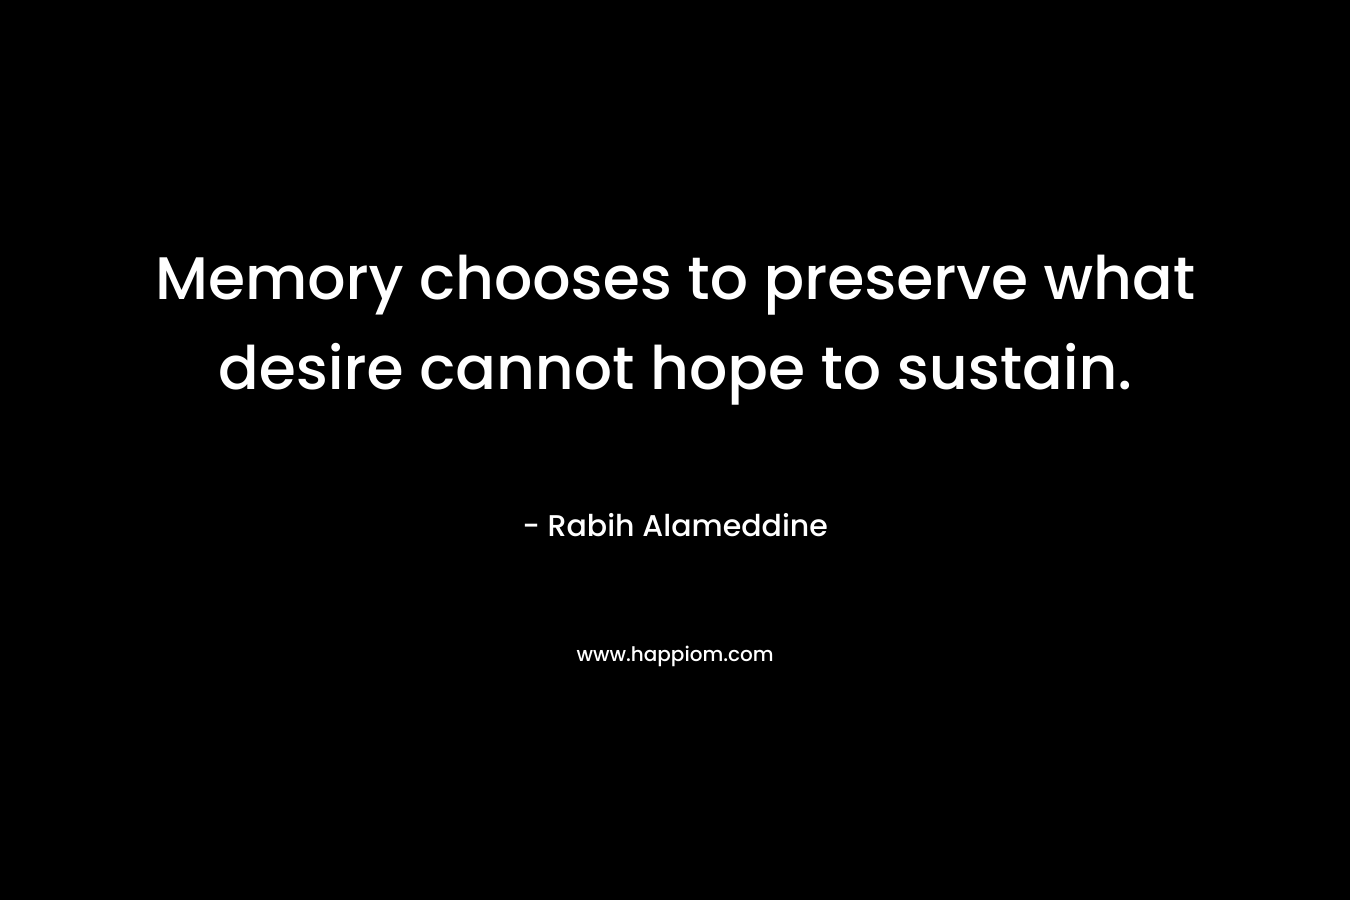 Memory chooses to preserve what desire cannot hope to sustain. – Rabih Alameddine